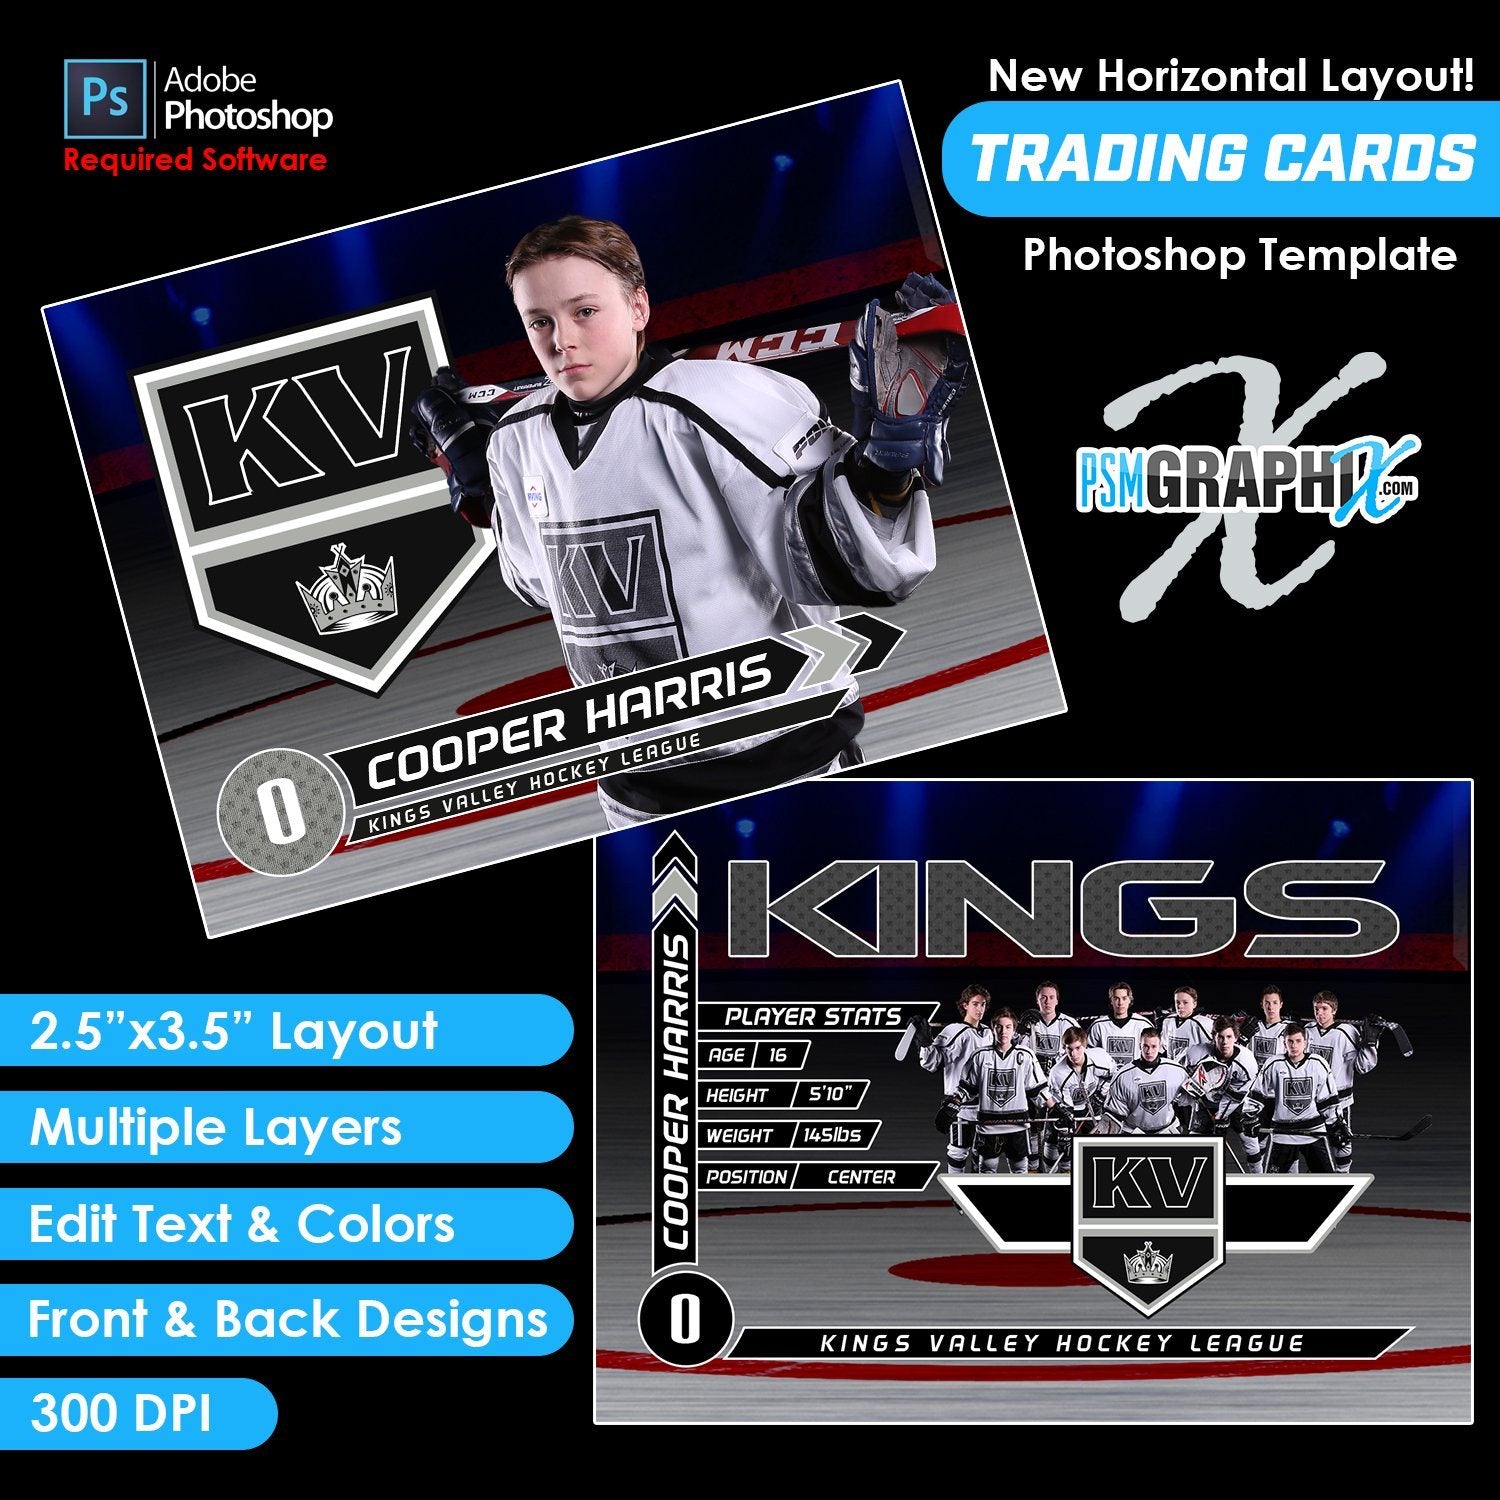 Face Off - V2 - Game Day Trading Card Template-Photoshop Template - PSMGraphix